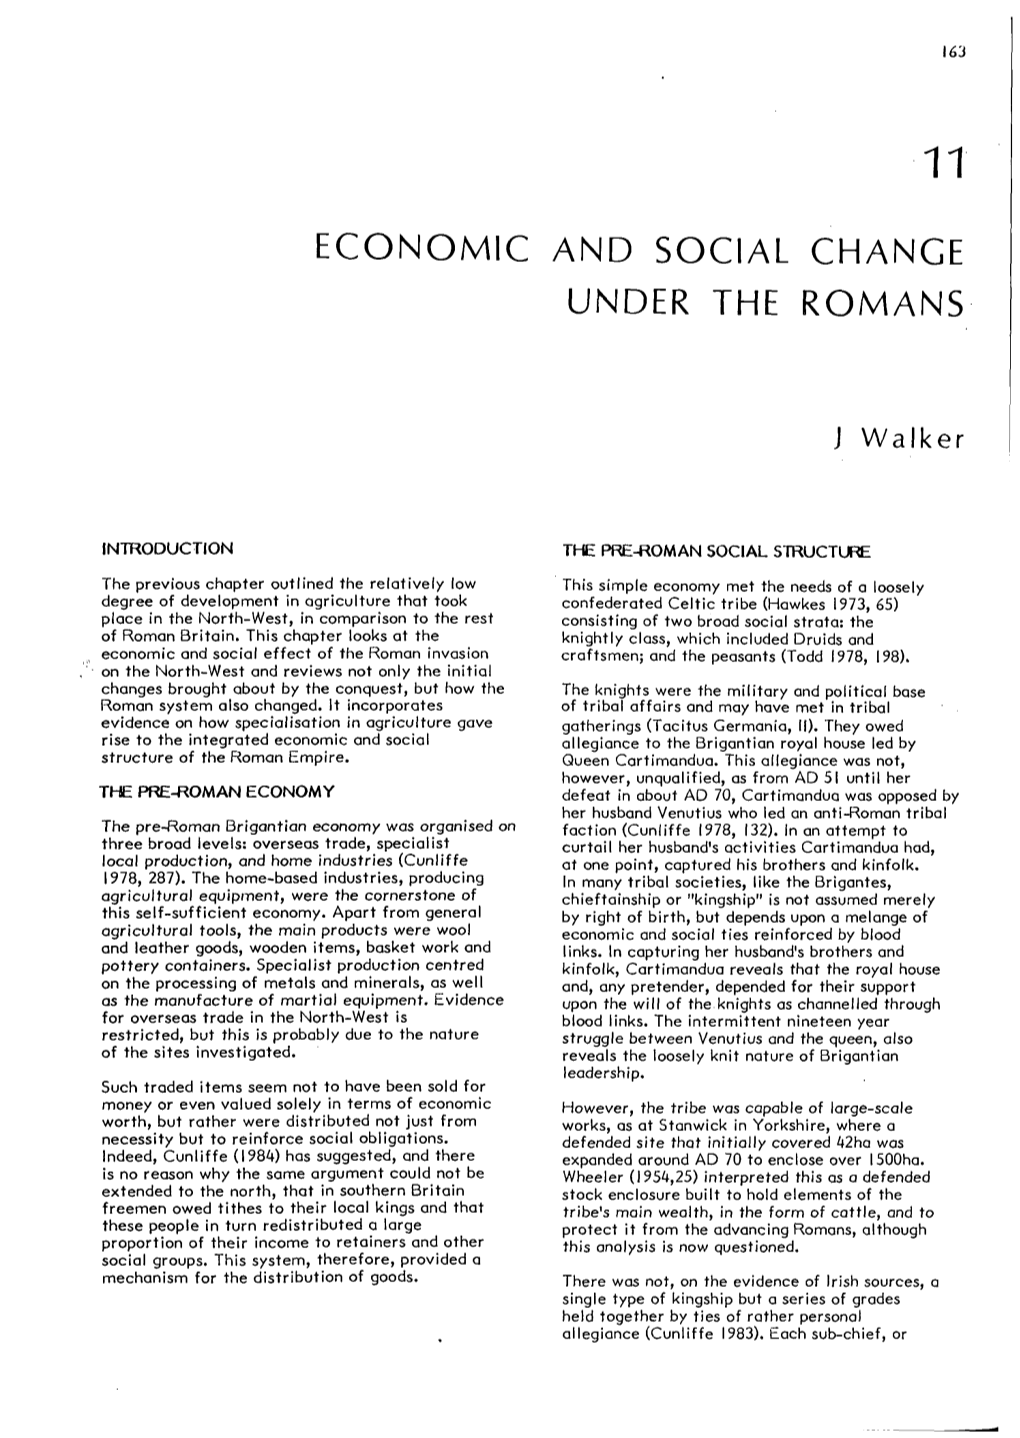 Economic and Social Chance Under the Romans